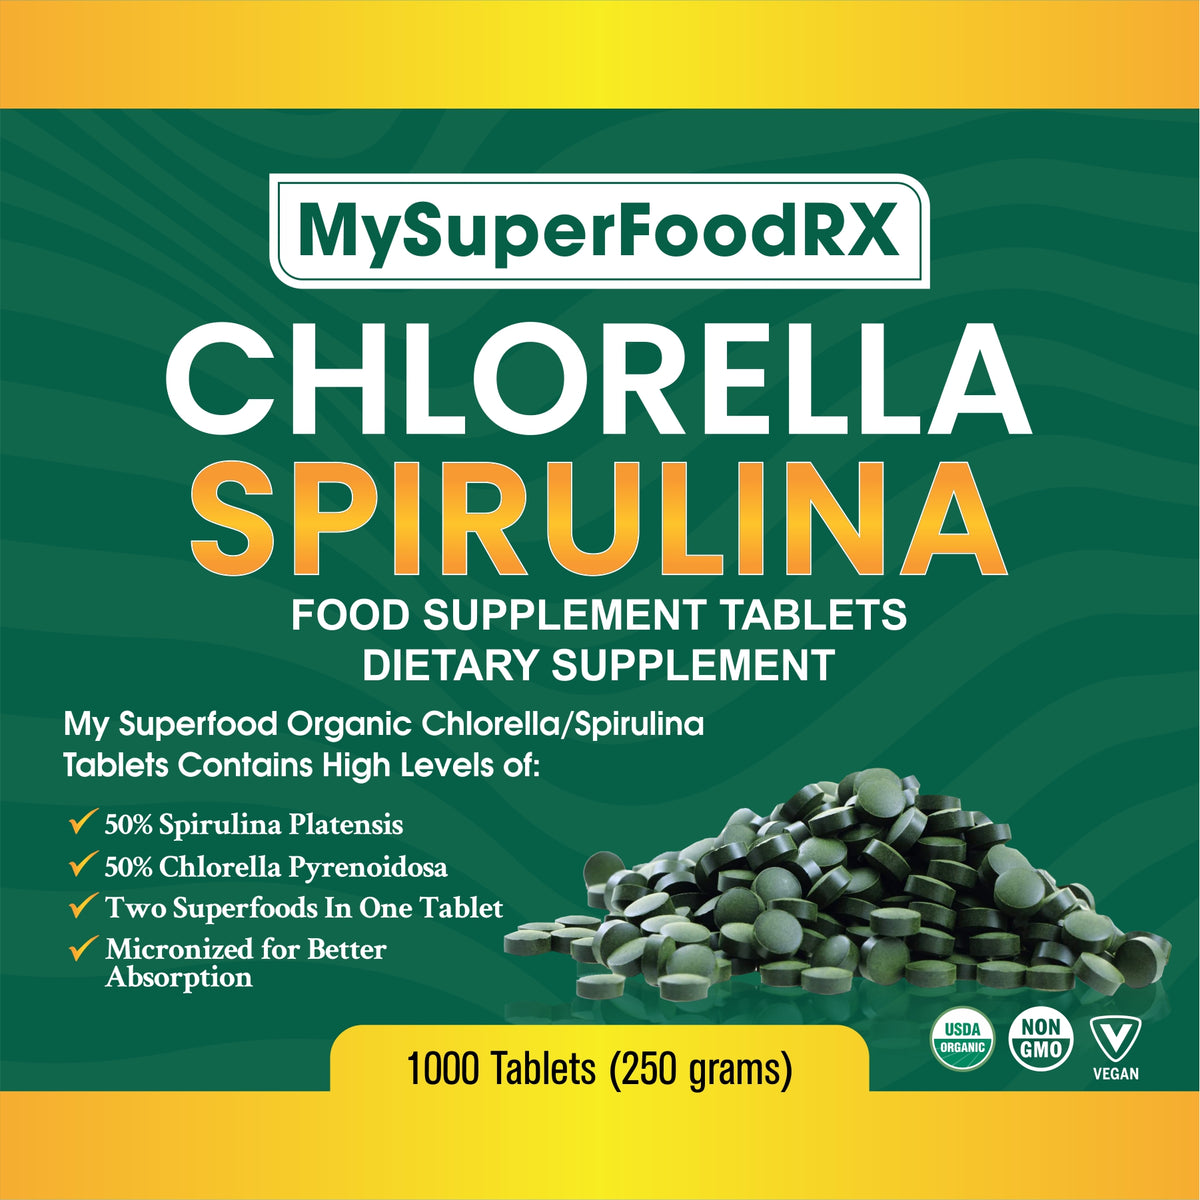 the label for my superfood rx chlorella spirula